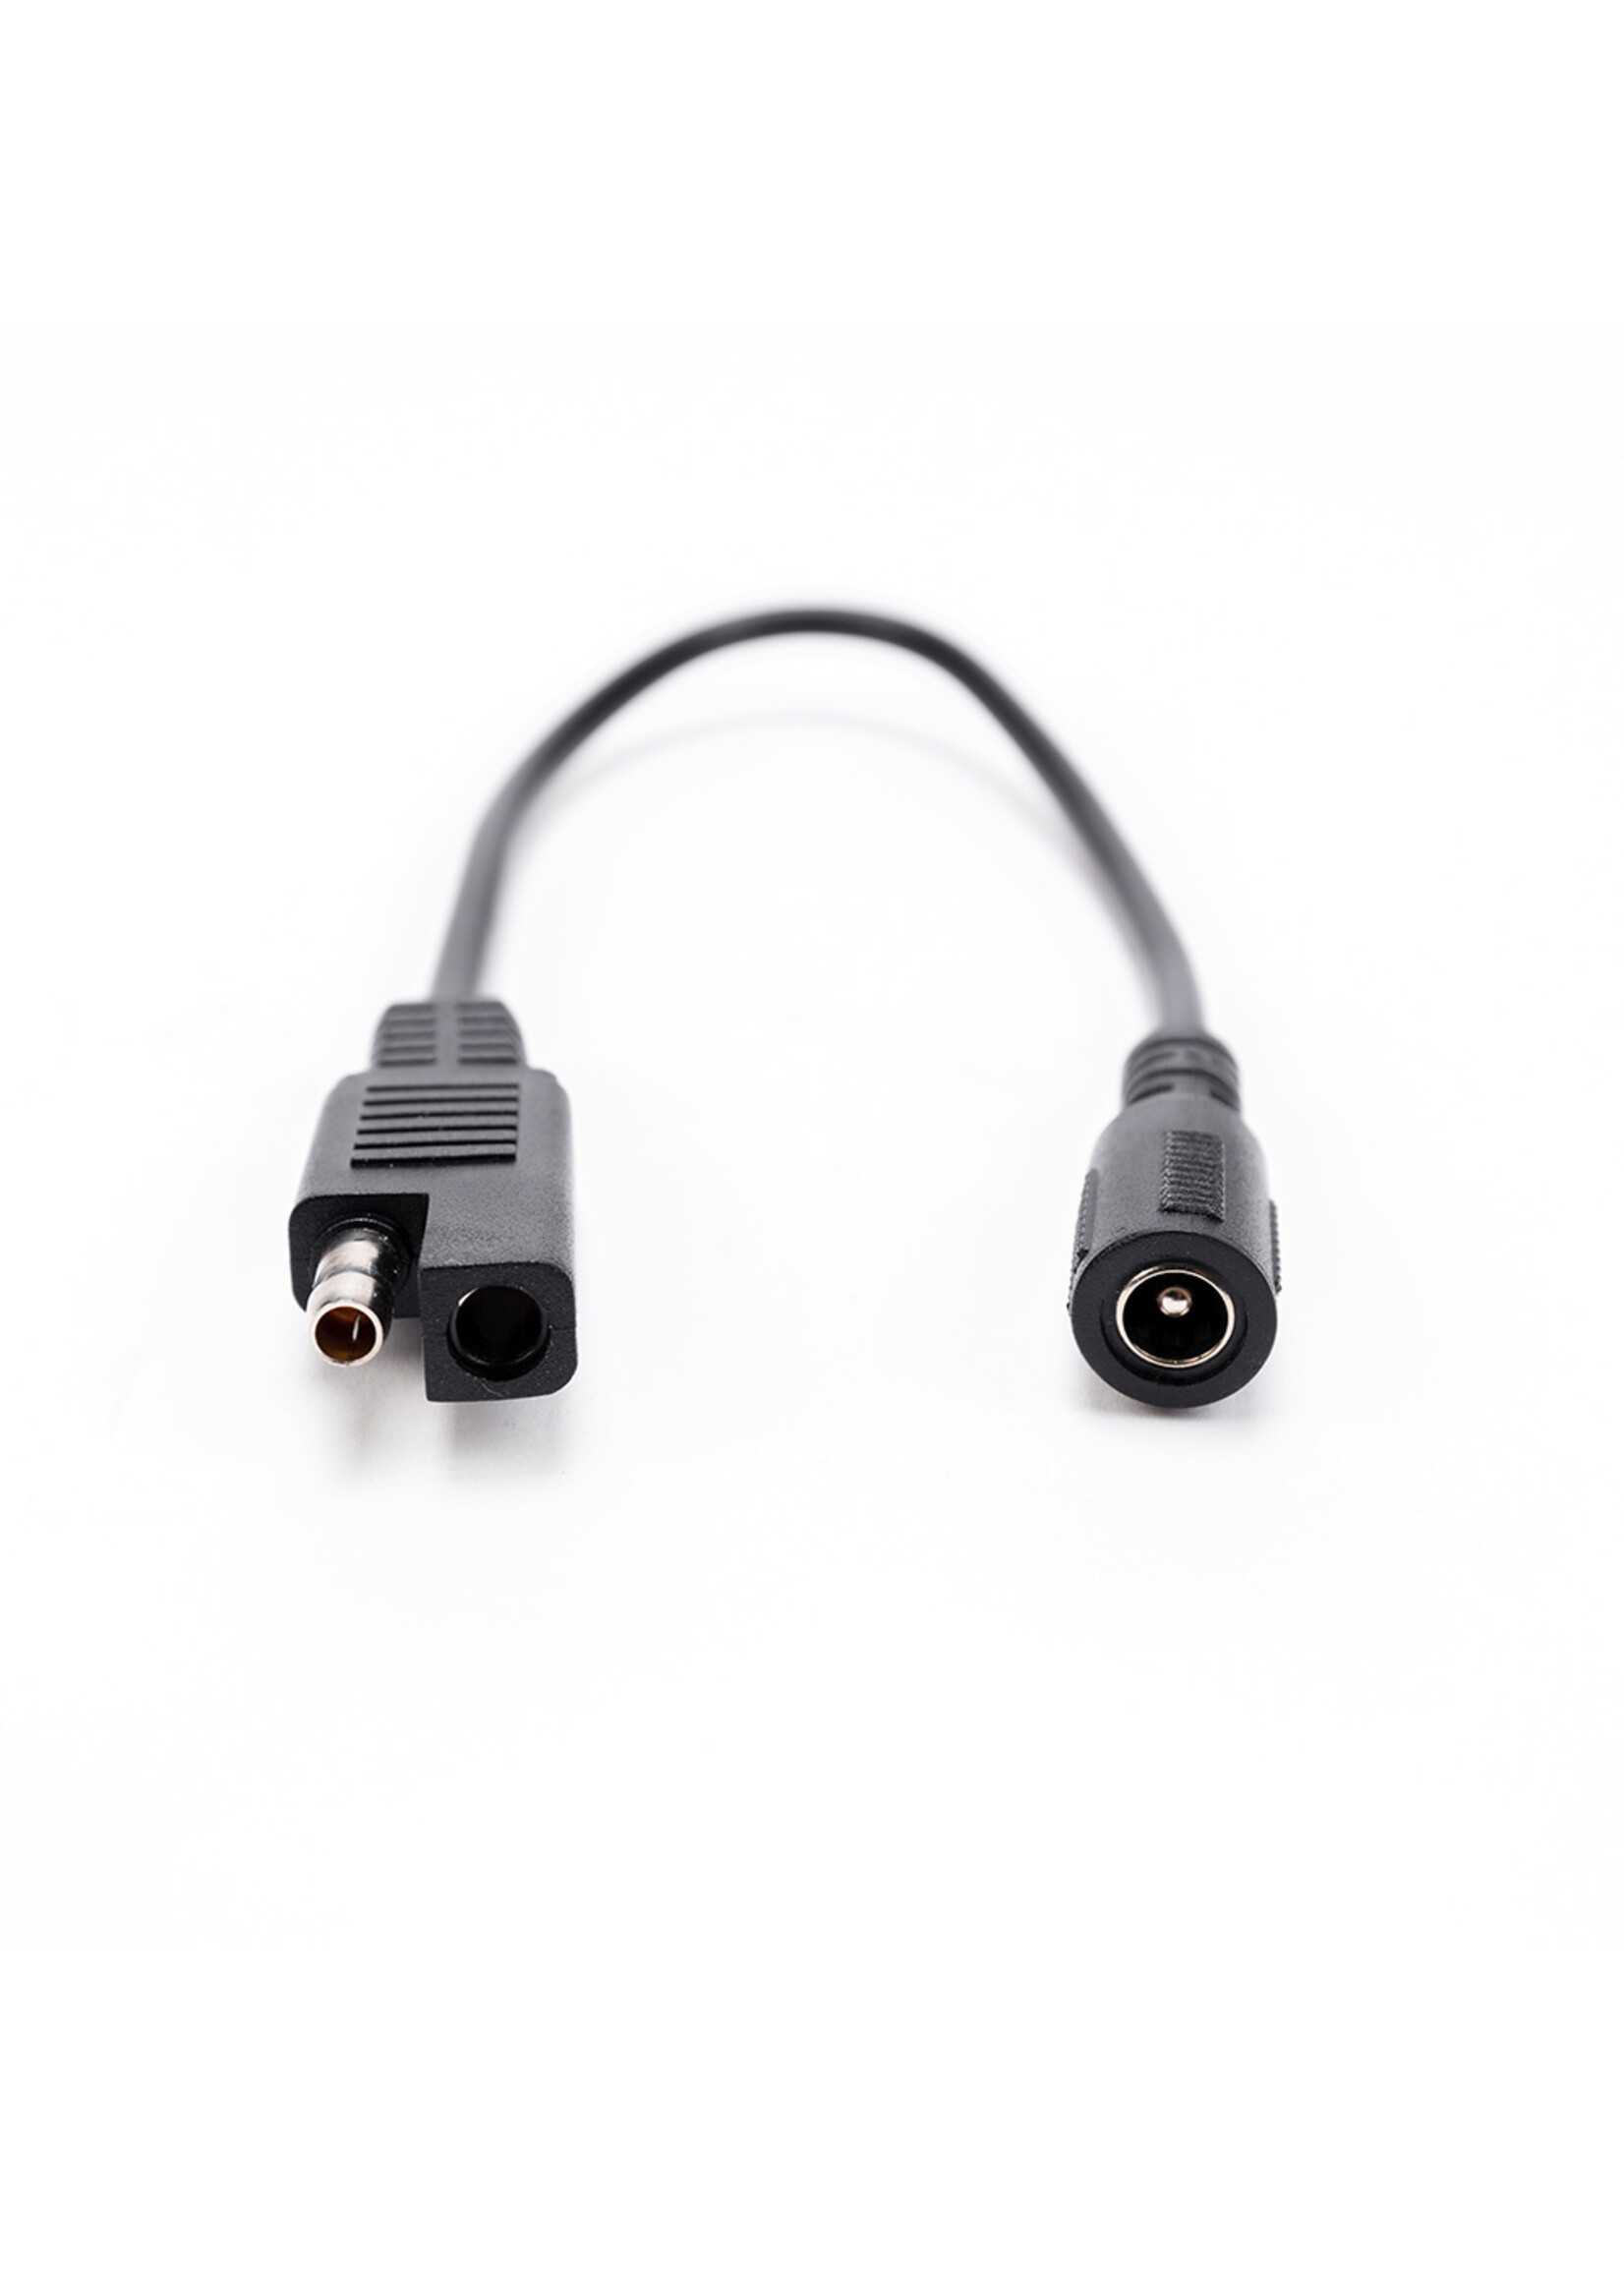 NORSK Lithium Norsk Lithium SAE to 5.5mm DC Adapter